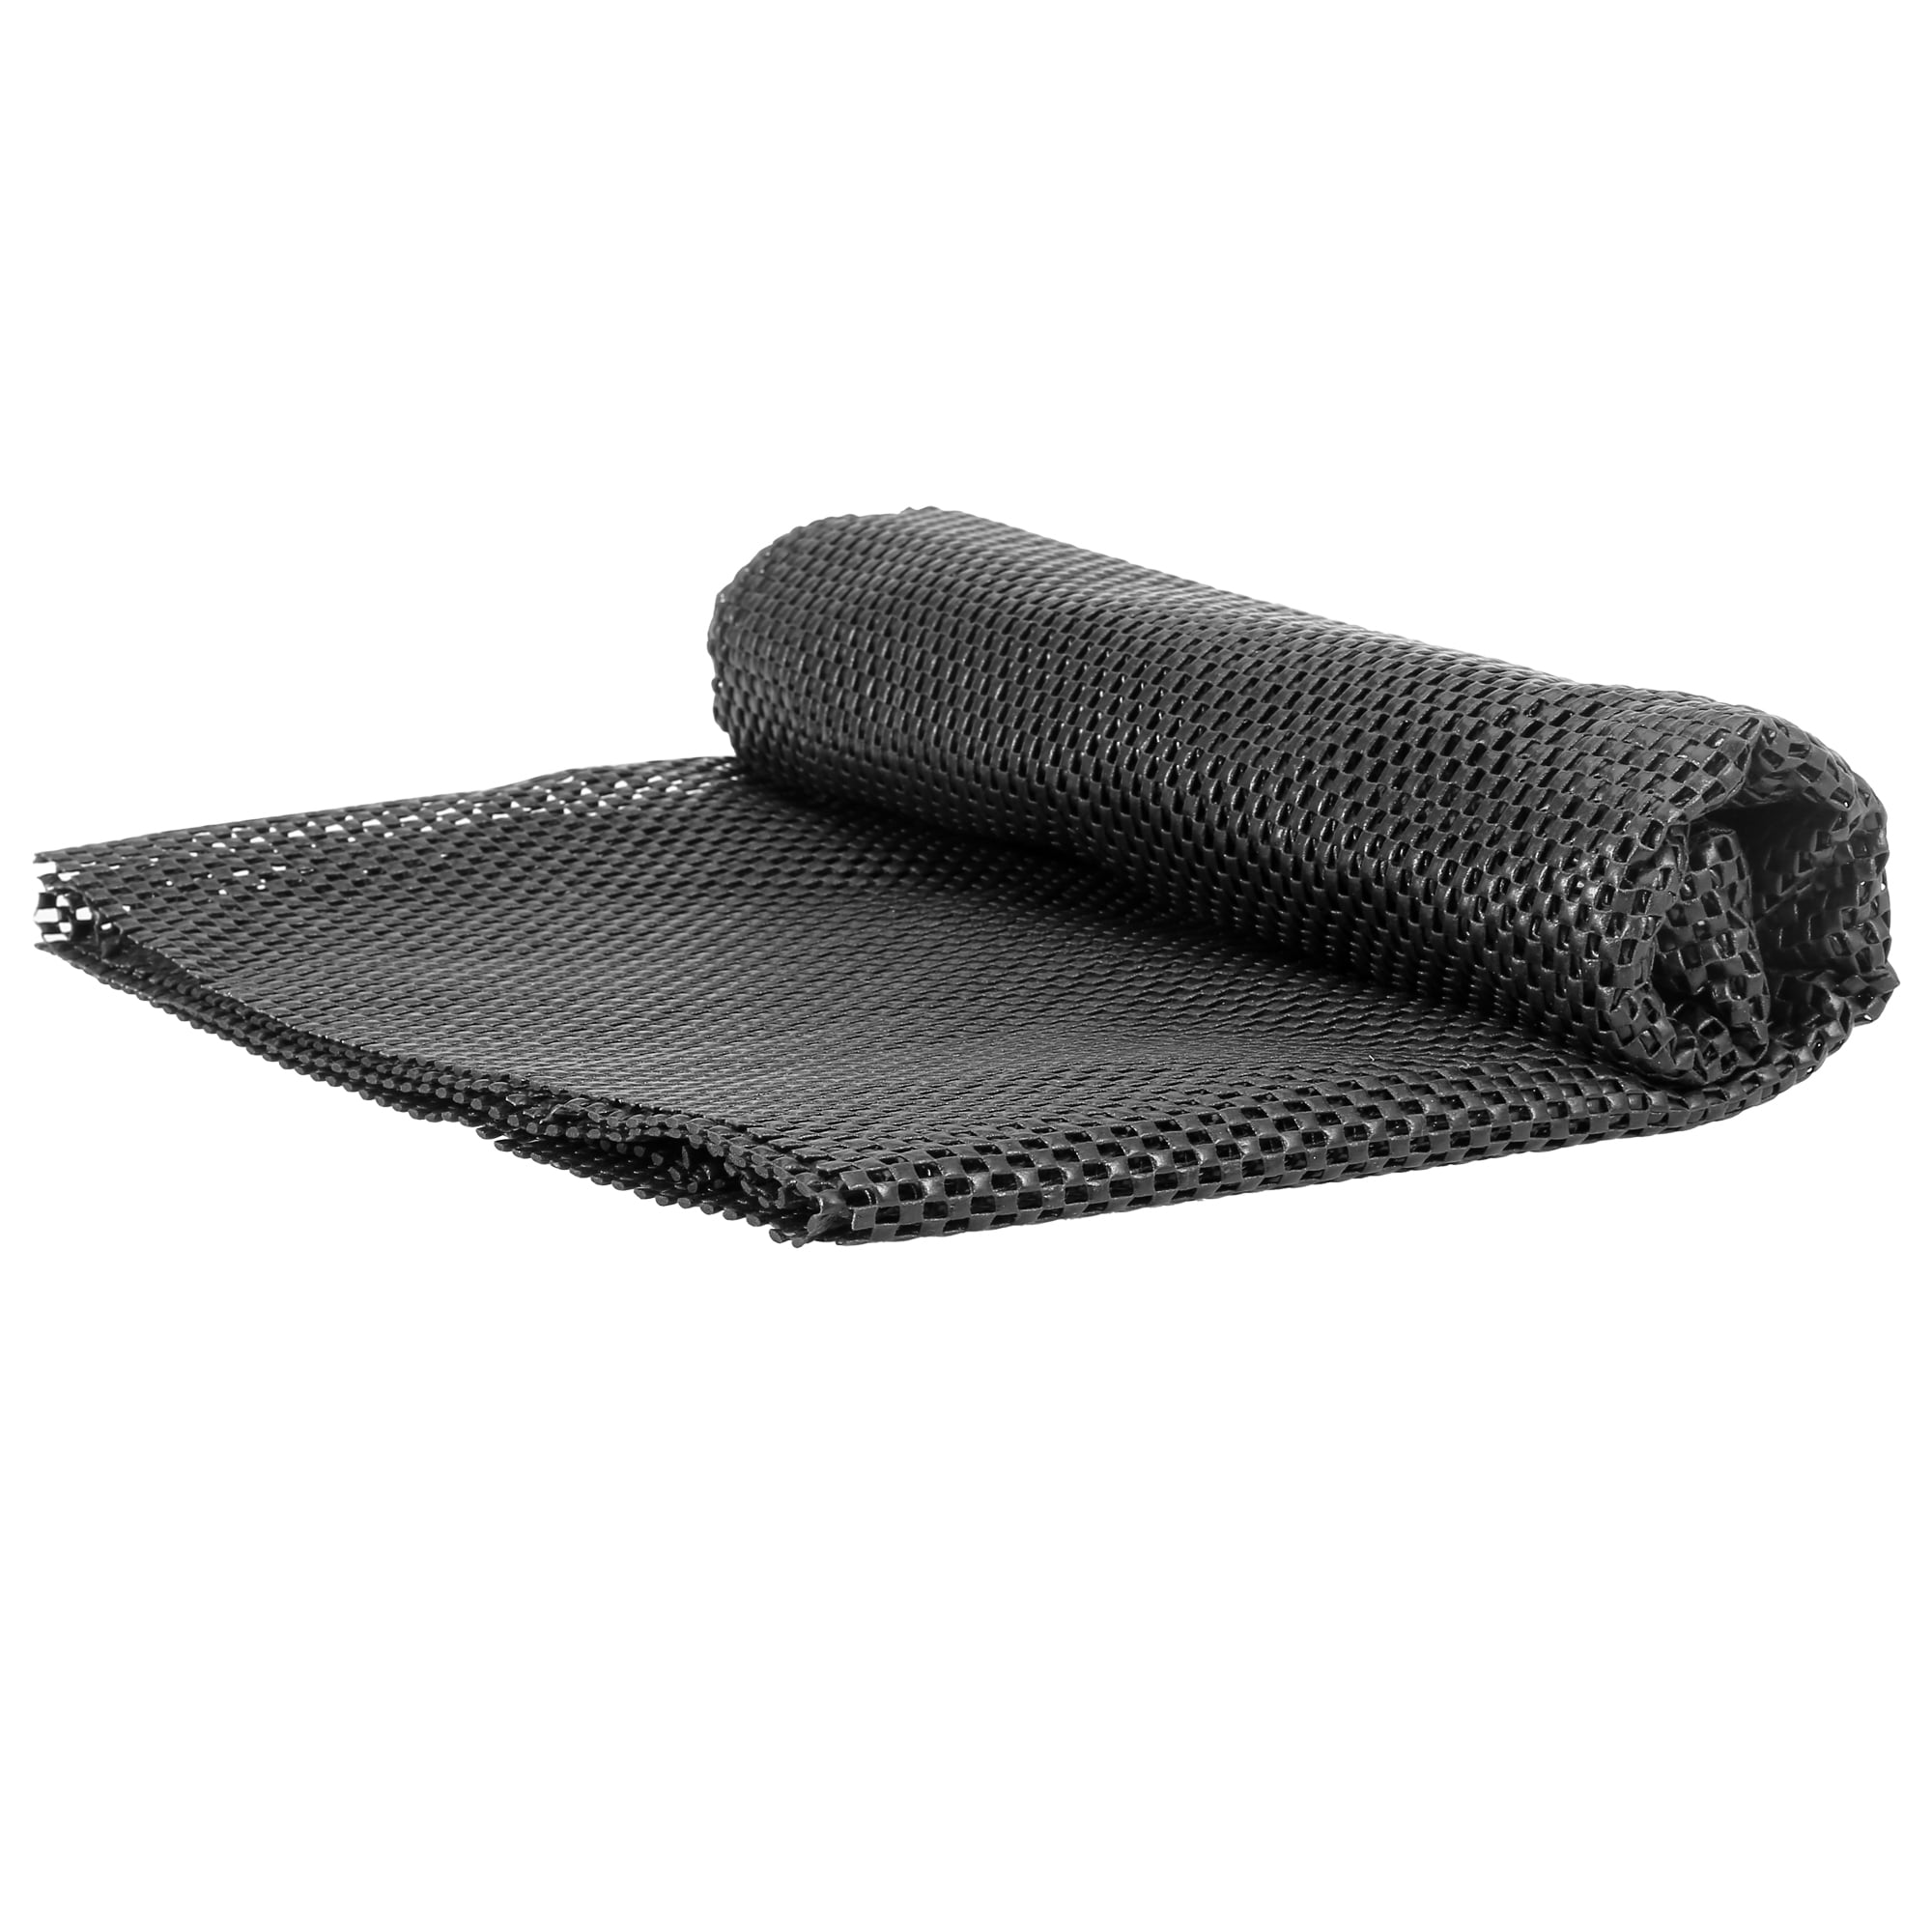 Advgears Rooftop Cargo Carrier Protective Mat for Car Roof Storage Bags Top Universal Roof Rack Pad for Rooftop Cargo Bag 